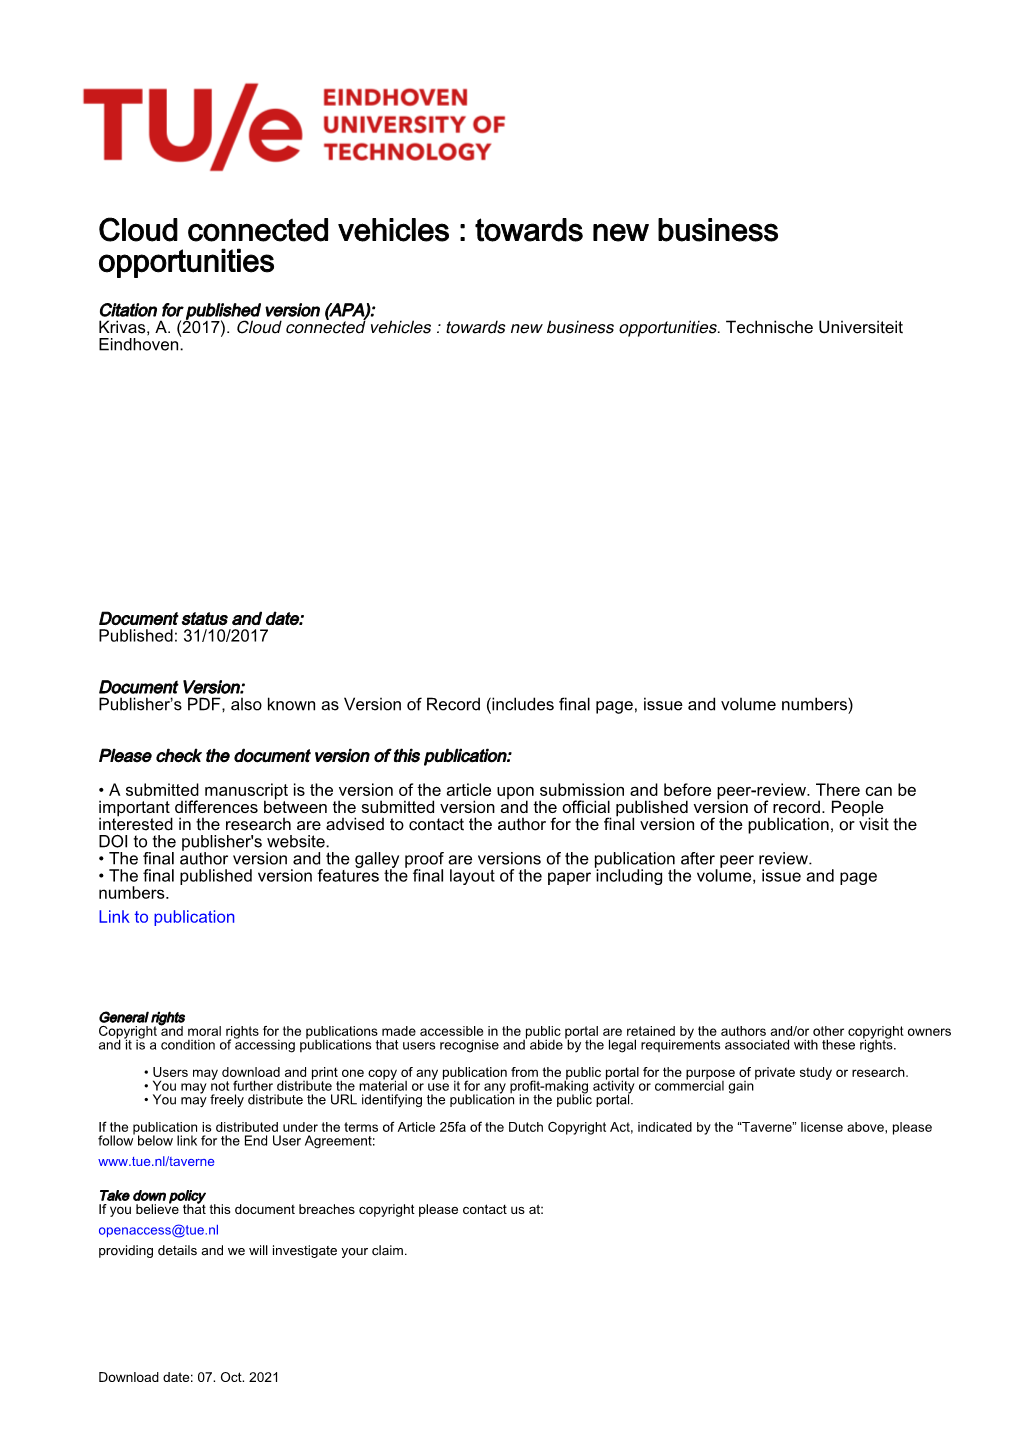 Cloud Connected Vehicles : Towards New Business Opportunities